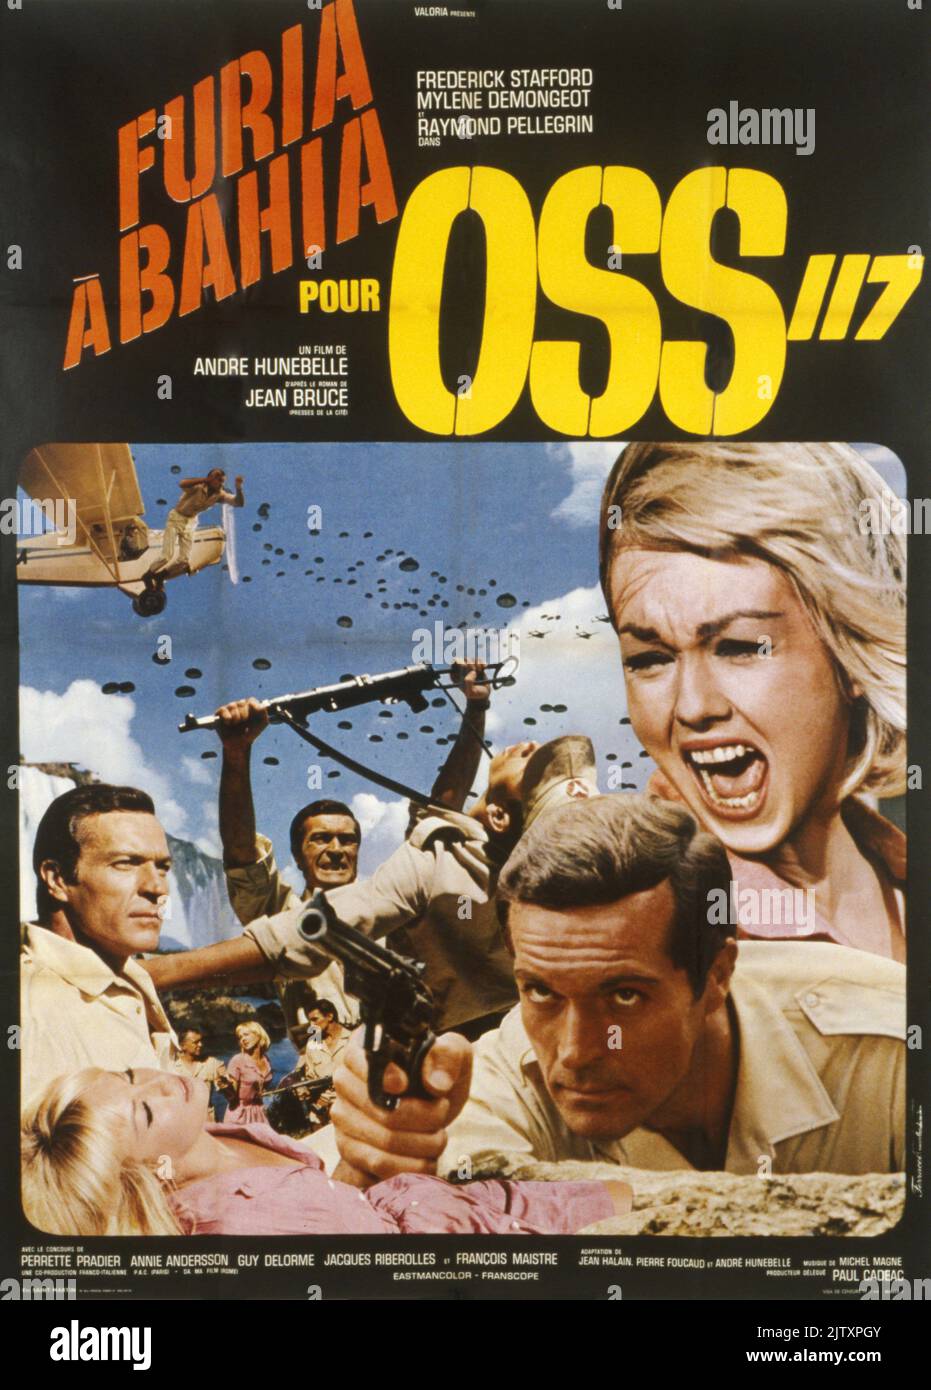 Furia à Bahia pour OSS 117 Year : 1965 France / Italy Director : André Hunebelle Raymond Pellegrin, Mylène Demongeot  French poster Stock Photo